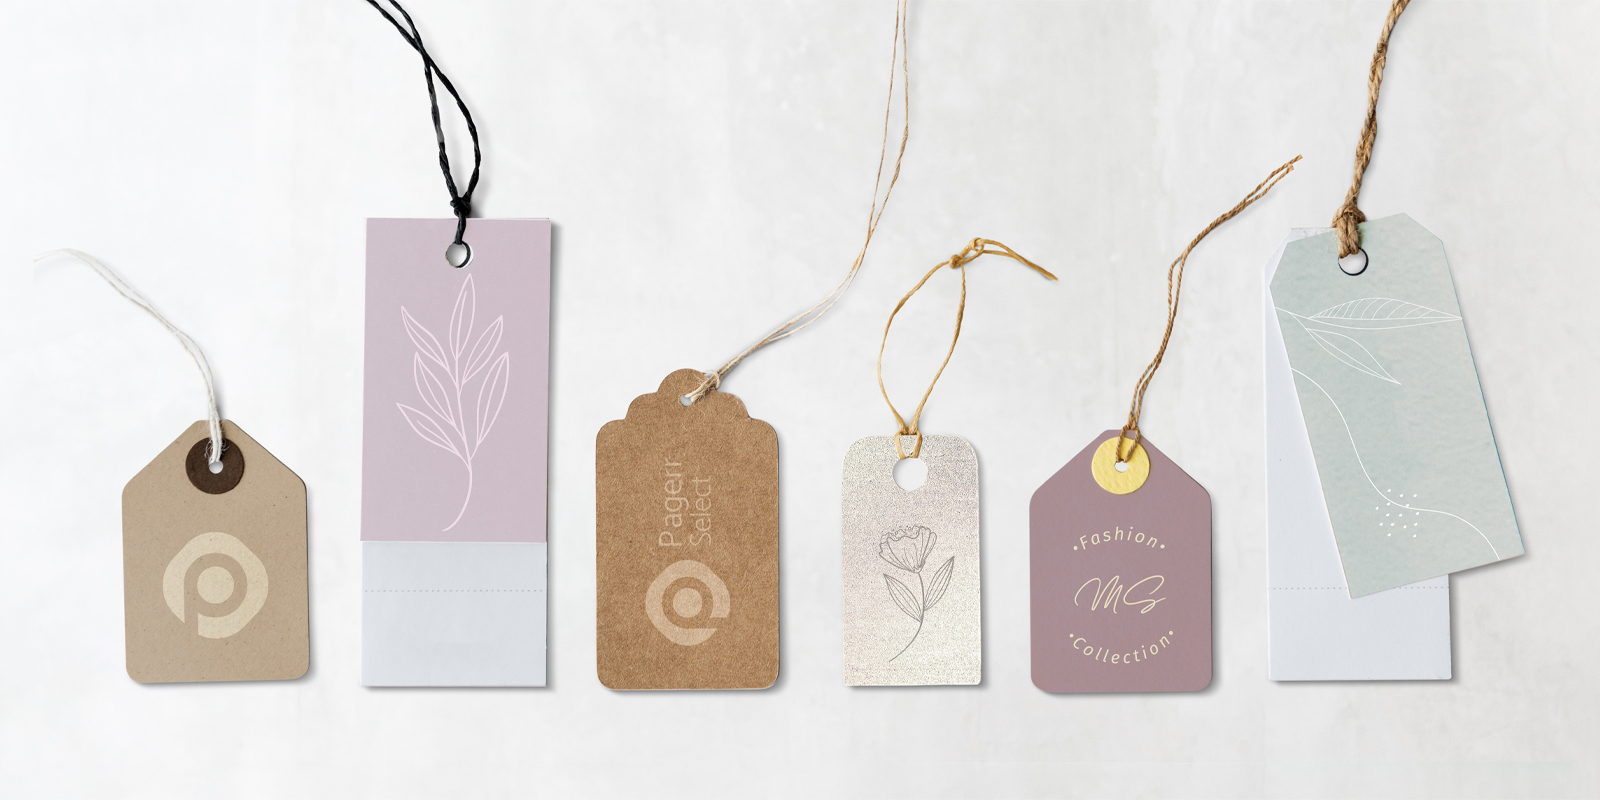 Product tags in Ballarat - Print with Pagerr